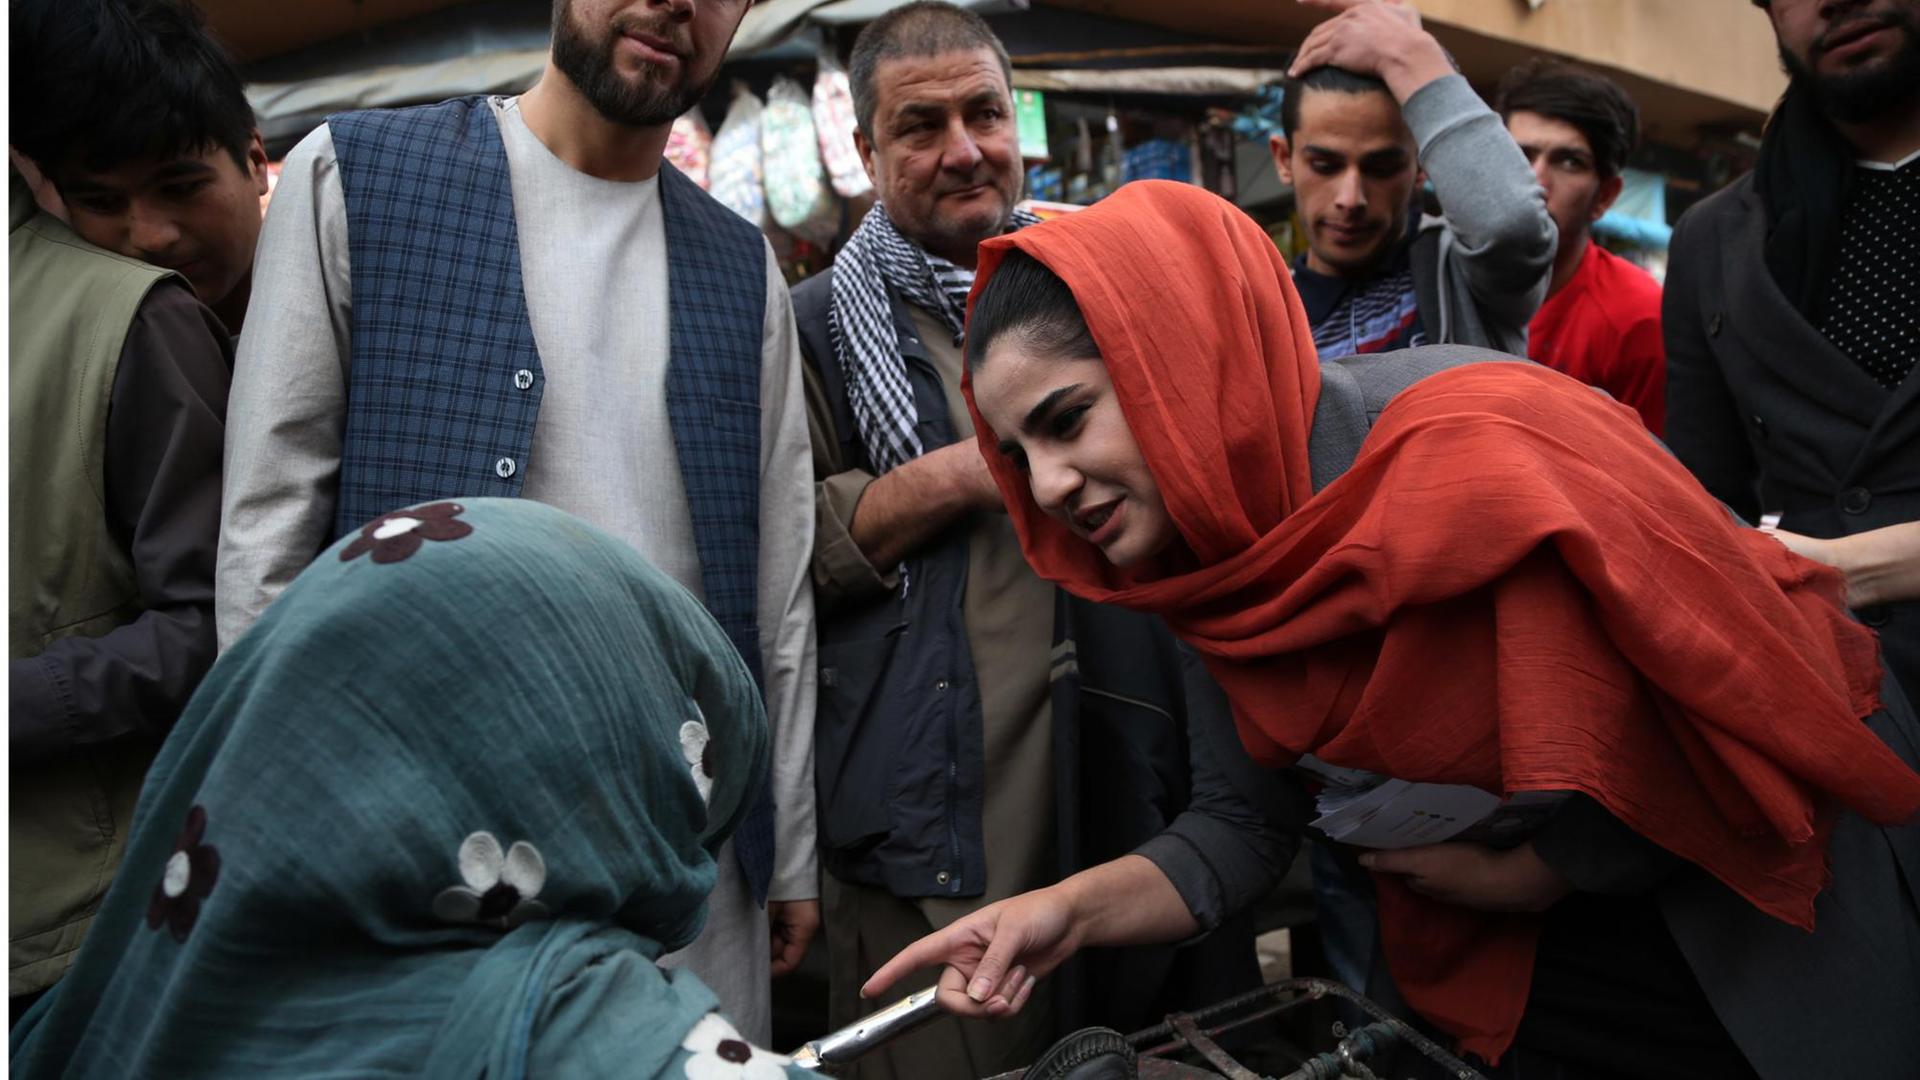 (181018) -- KABUL, Oct. 18, 2018 () -- A female parliamentary election candidate, Maryam Sama (R), campaigns on a street in Kabul, capital of Afghanistan, Oct. 13, 2018. During the upcoming polls, nearly 9 million registered voters, including 3 million women, out of some 12 million eligible Afghans, will cast their ballots to elect members of the lower house for a five-year term. (/Rahmat Alizadah) (hy) |